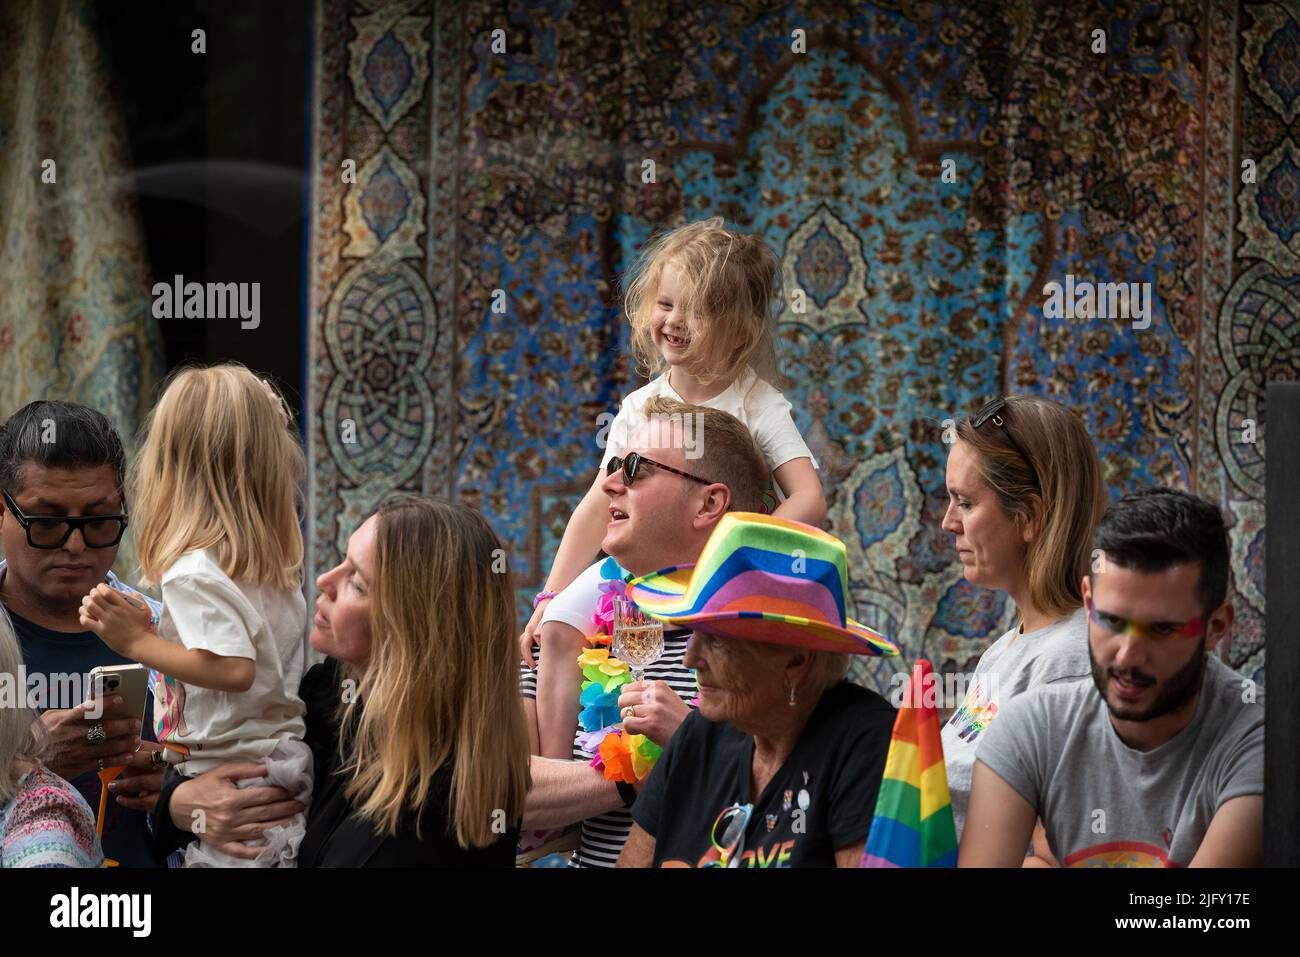 Piccadilly, London, UK. 2nd July 2022. London Pride March 2022. Celebrating 50 Years of Pride in the UK and following the same central London route taken in 1972. Roadside people watching the London Pride march with child on mans shoulders. Credit: Stephen Bell/Alamy Stock Photo